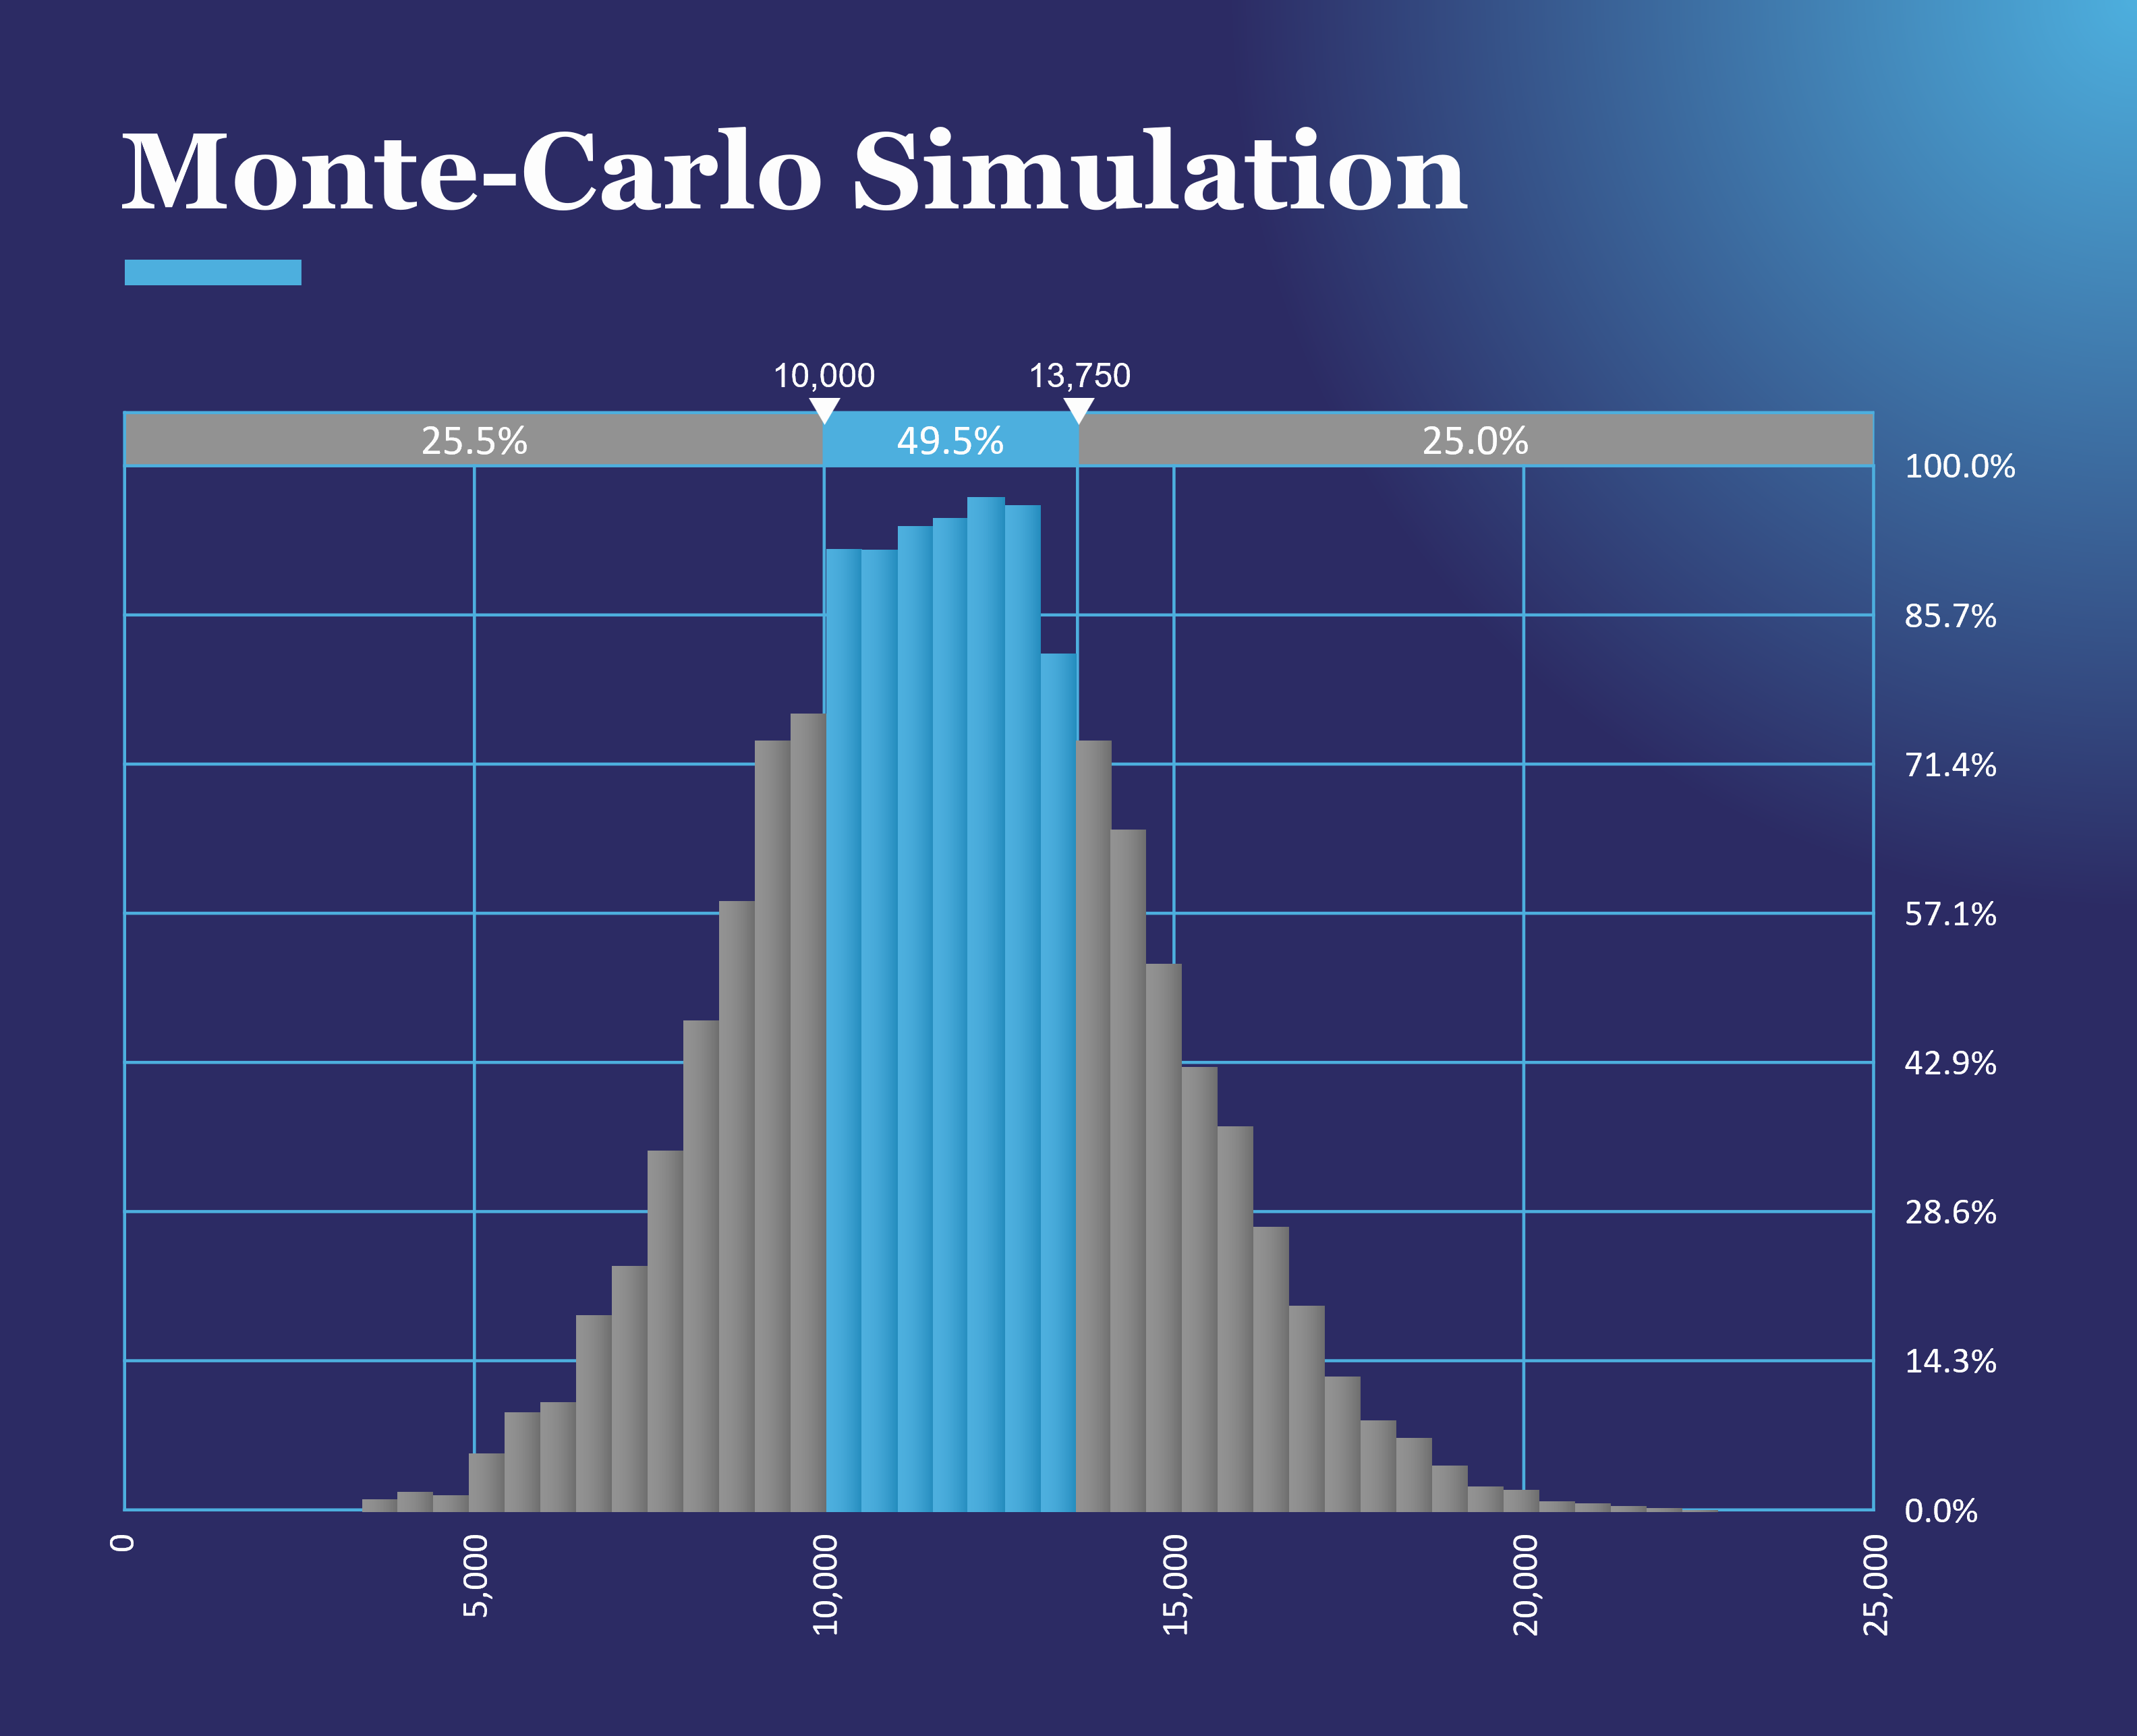 Applying a Monte-Carlo simulation to calculate the contingency reserve via the probabilistic method